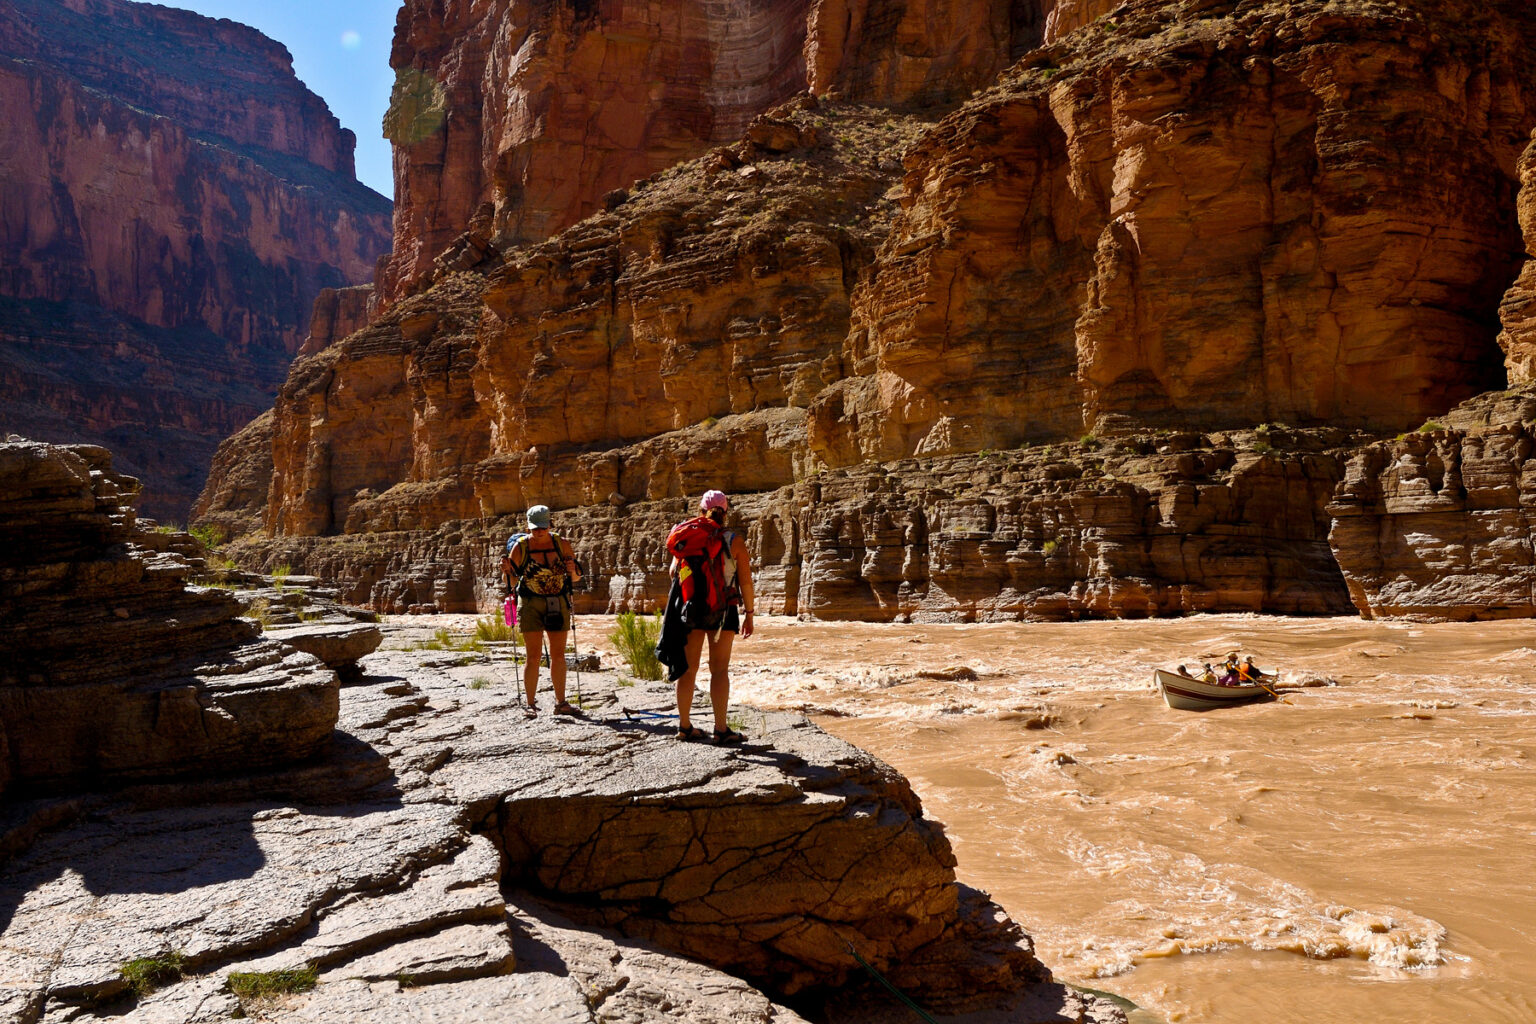 Two hikers tand on a rocky ledge and watch a dory about to enter a rapid on the Coloardo River through Grand Canyon